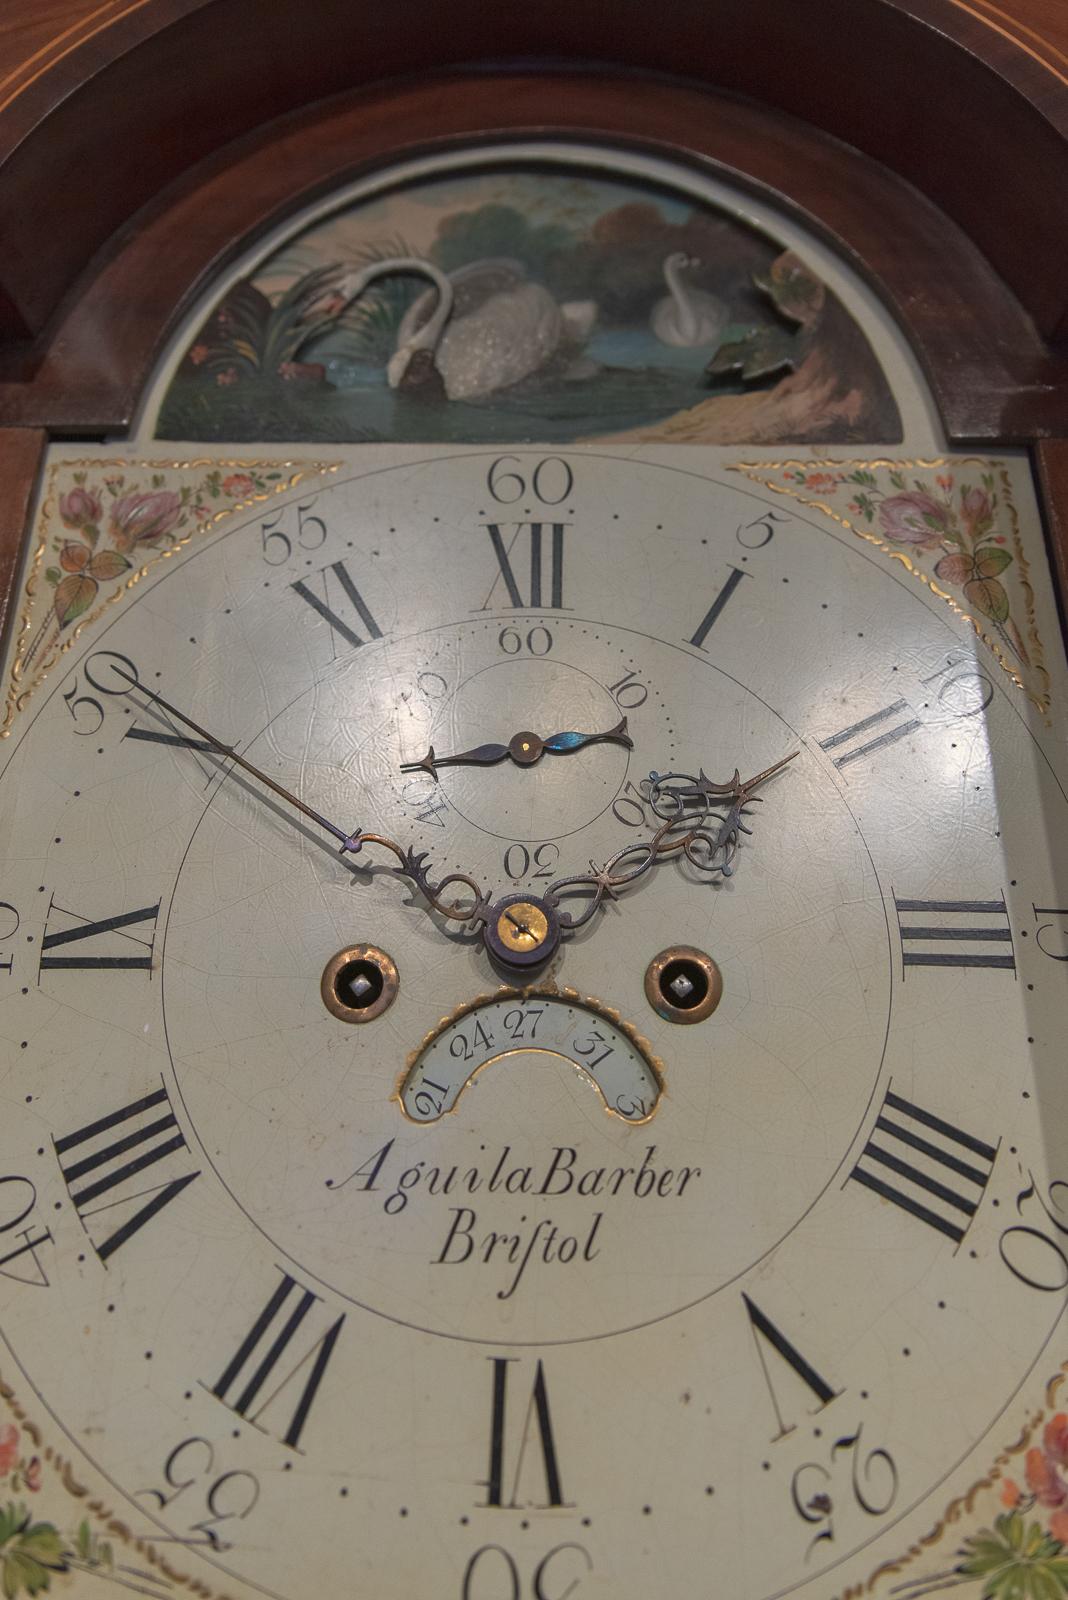 A beautiful 8 day arched rocking swan automata Grandfather clock.
As the clock ticks, the swans neck gracefully dips into the water.
A rare clock made by Aquilla Barber of Bristol who is a well documented maker from 1781 to 1841.
This clock is